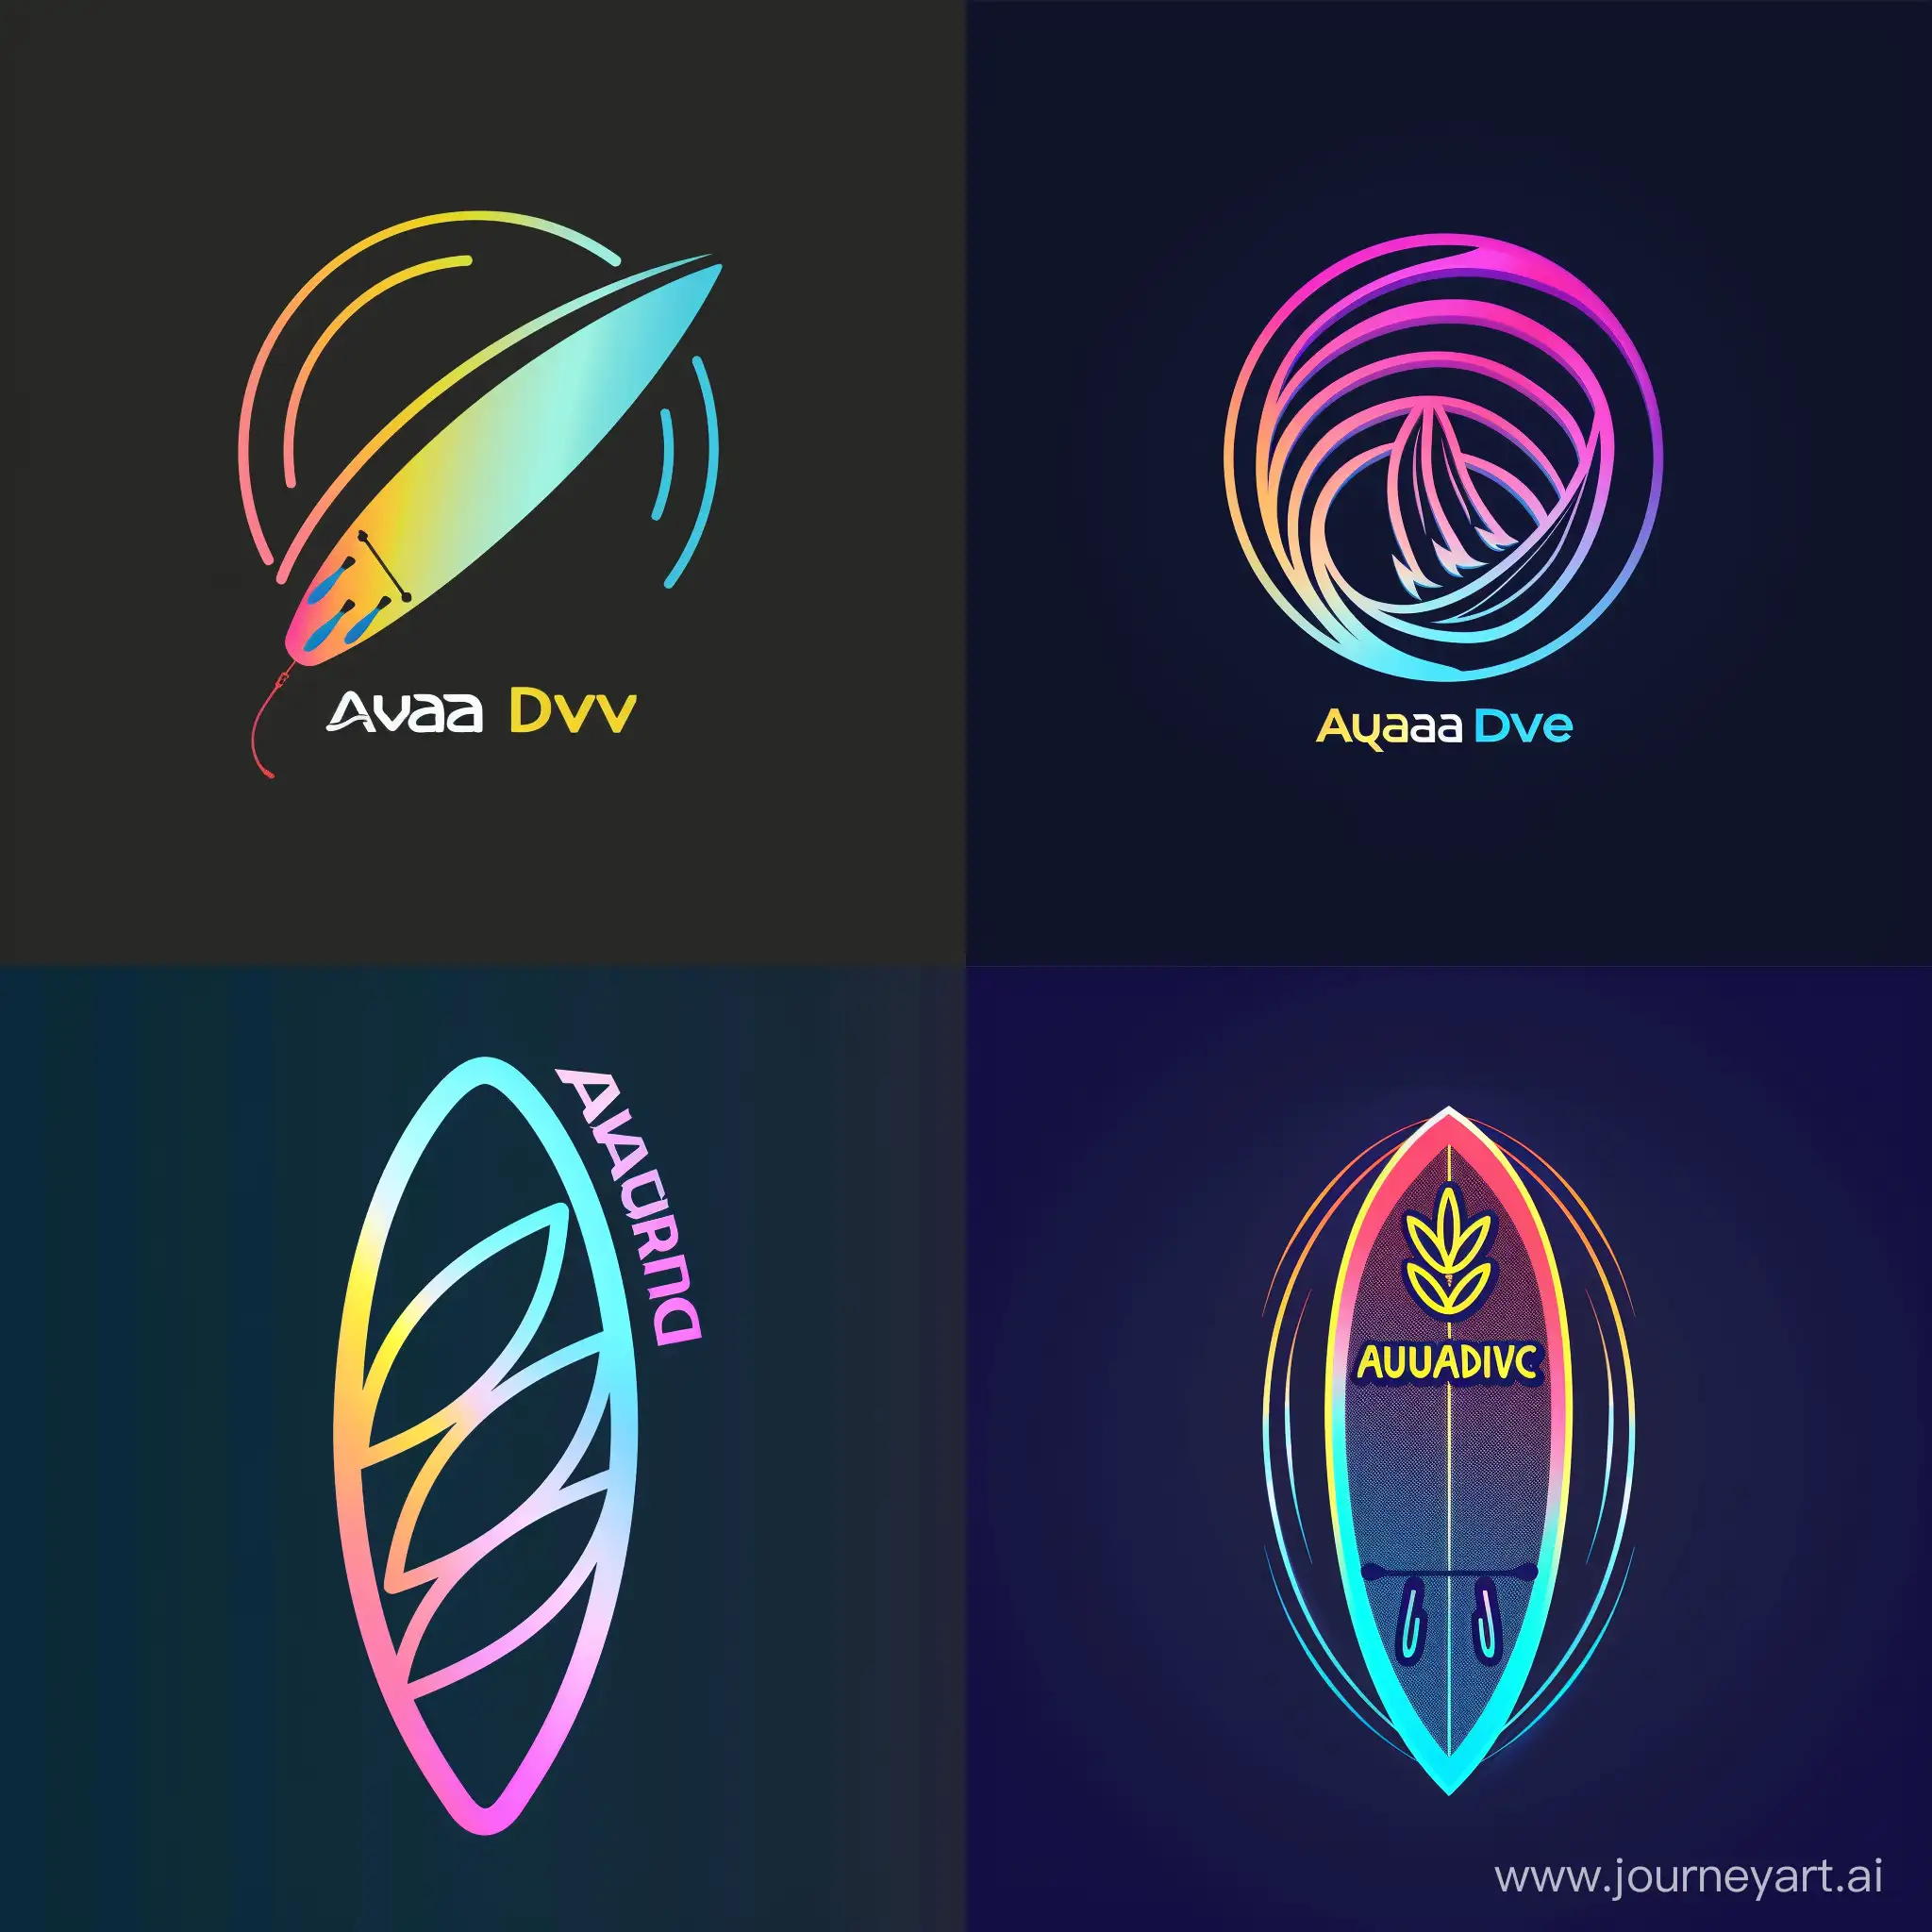 Logo in fluorescent colors for a SUP surfing startup called "AquaDrive"